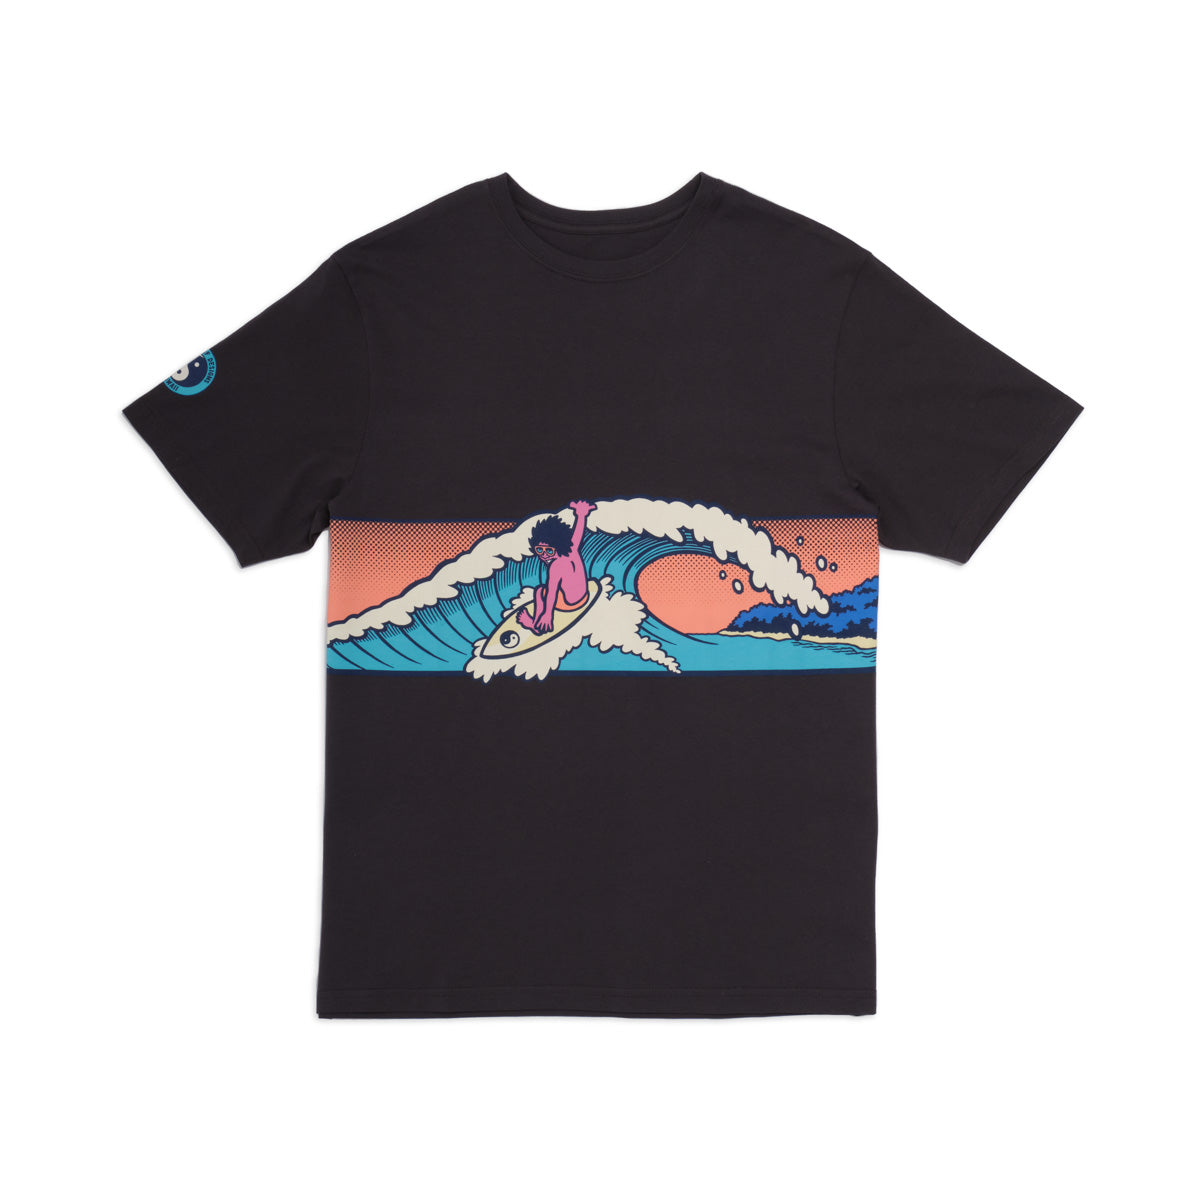 L. Turn S/S Tee Washed Black